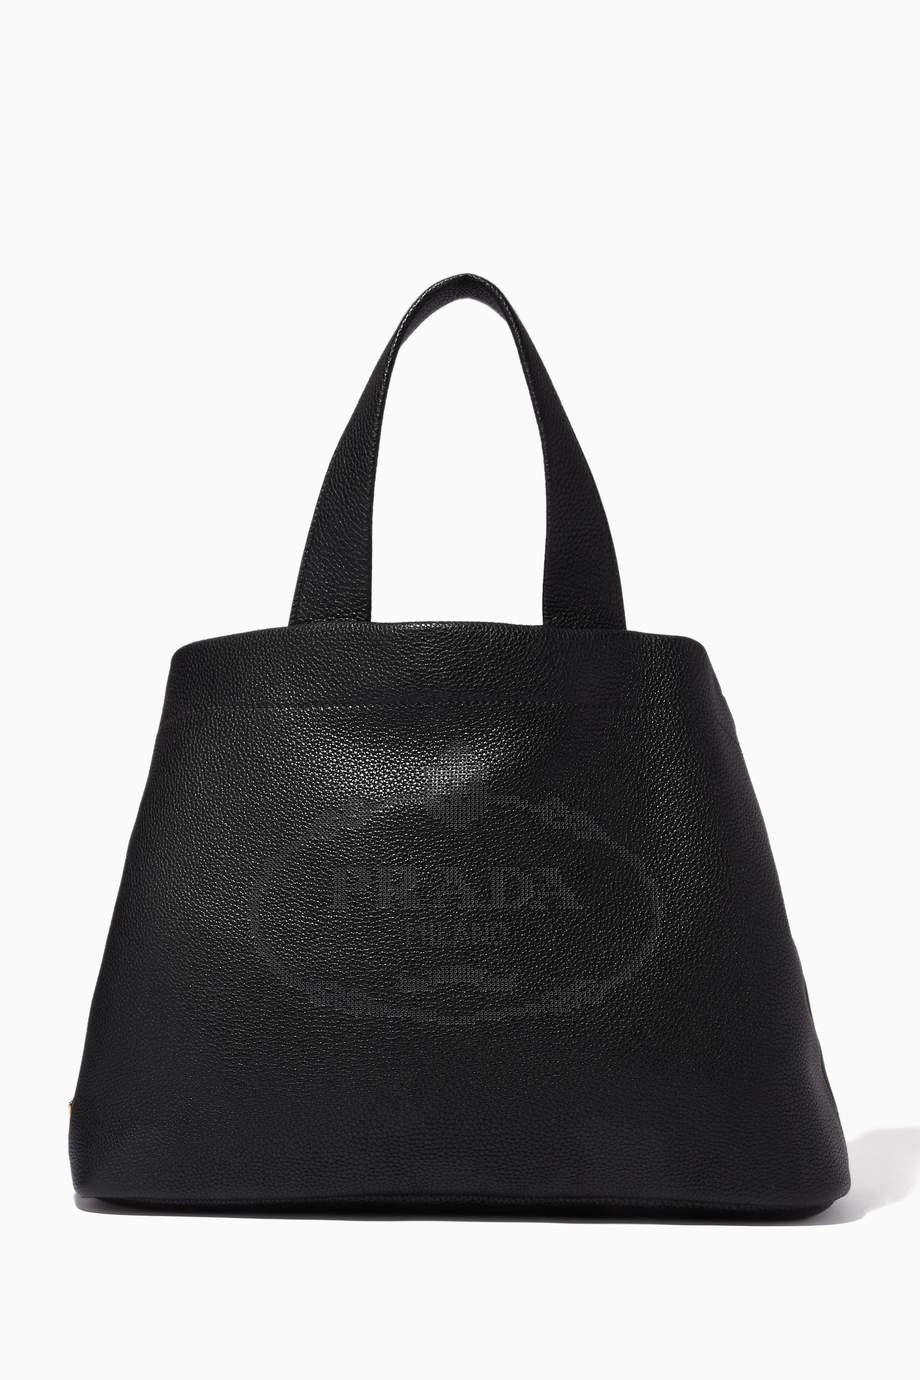 Shop Prada Black Perforated Logo Large Tote Bag in Calf Leather for Women | Ounass UAE